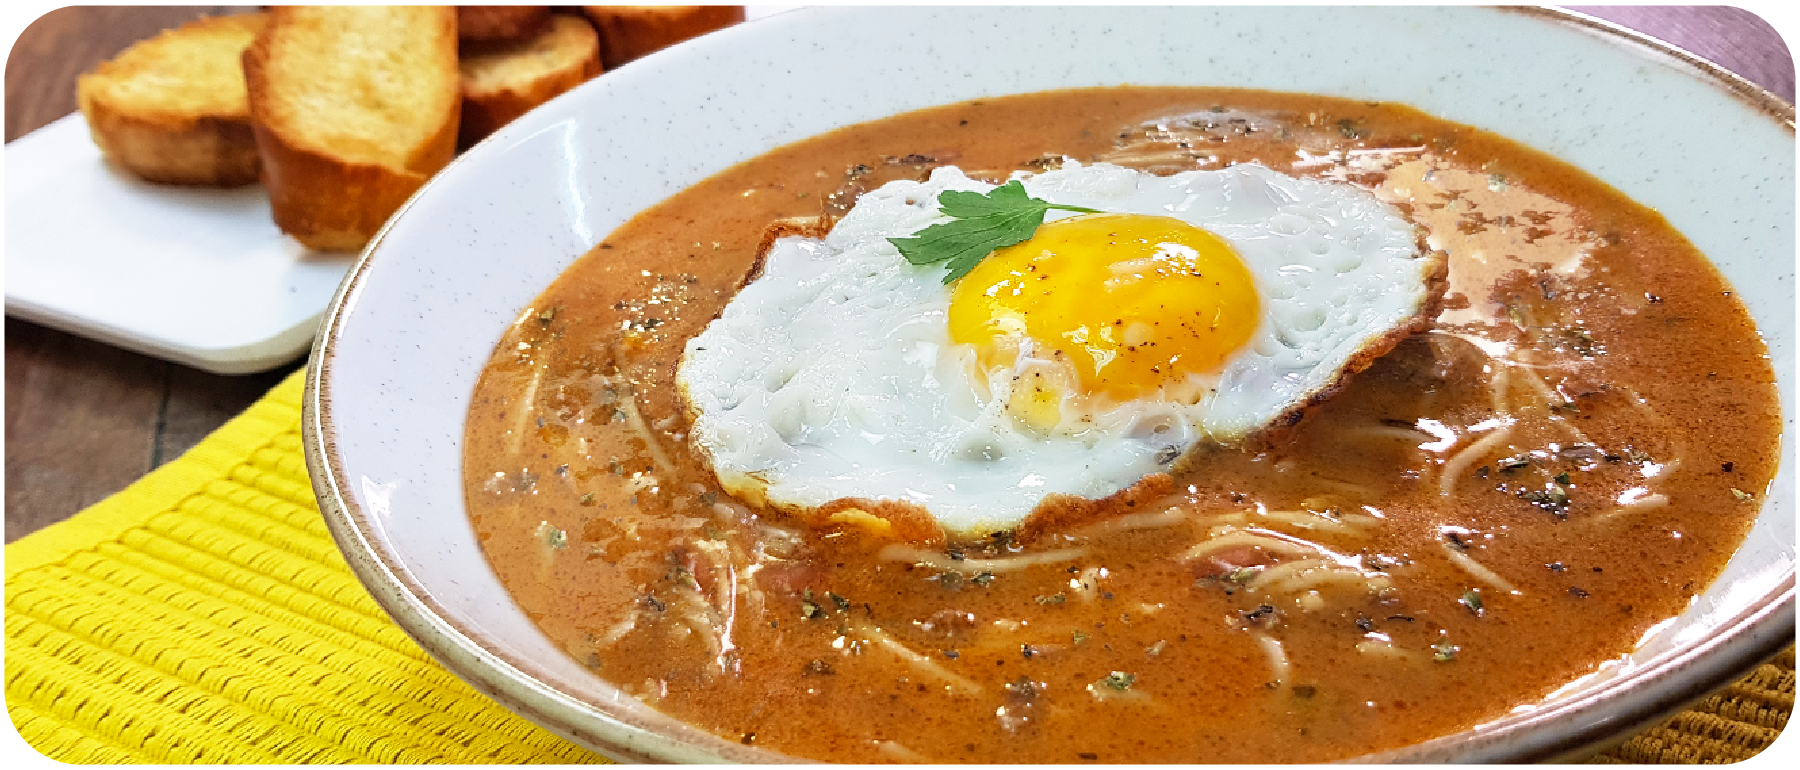 Peruvian Easy and Comforting Creole Soup - Sopa Criolla